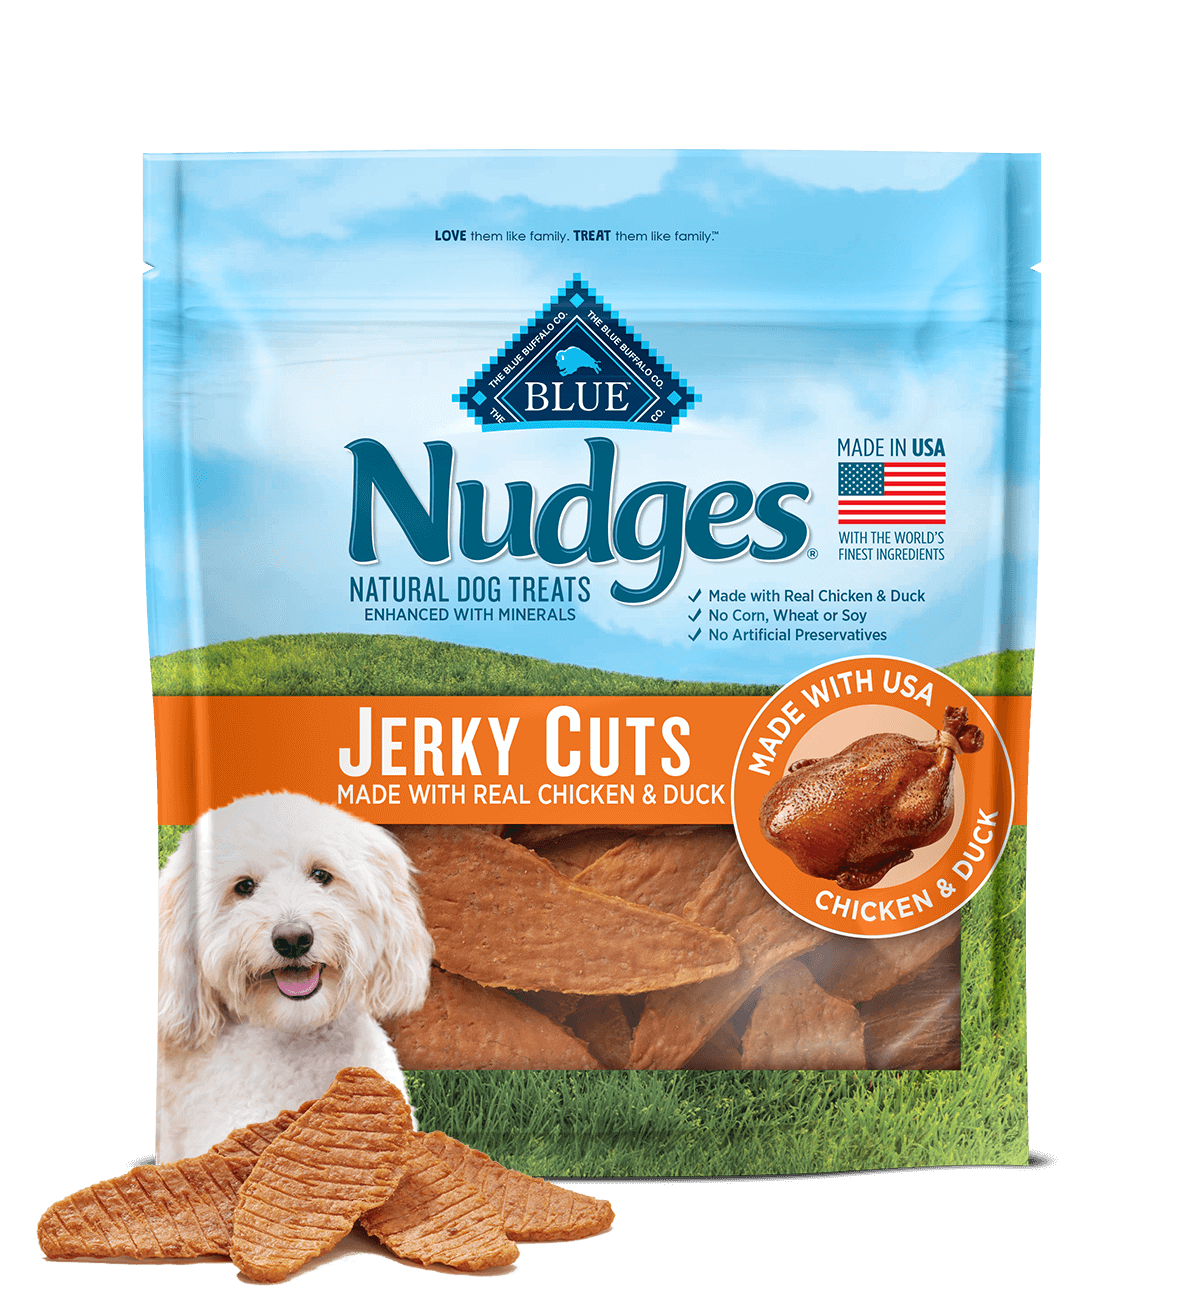 blue nudges ® protein-packed chicken & duck jerky cuts dog treats